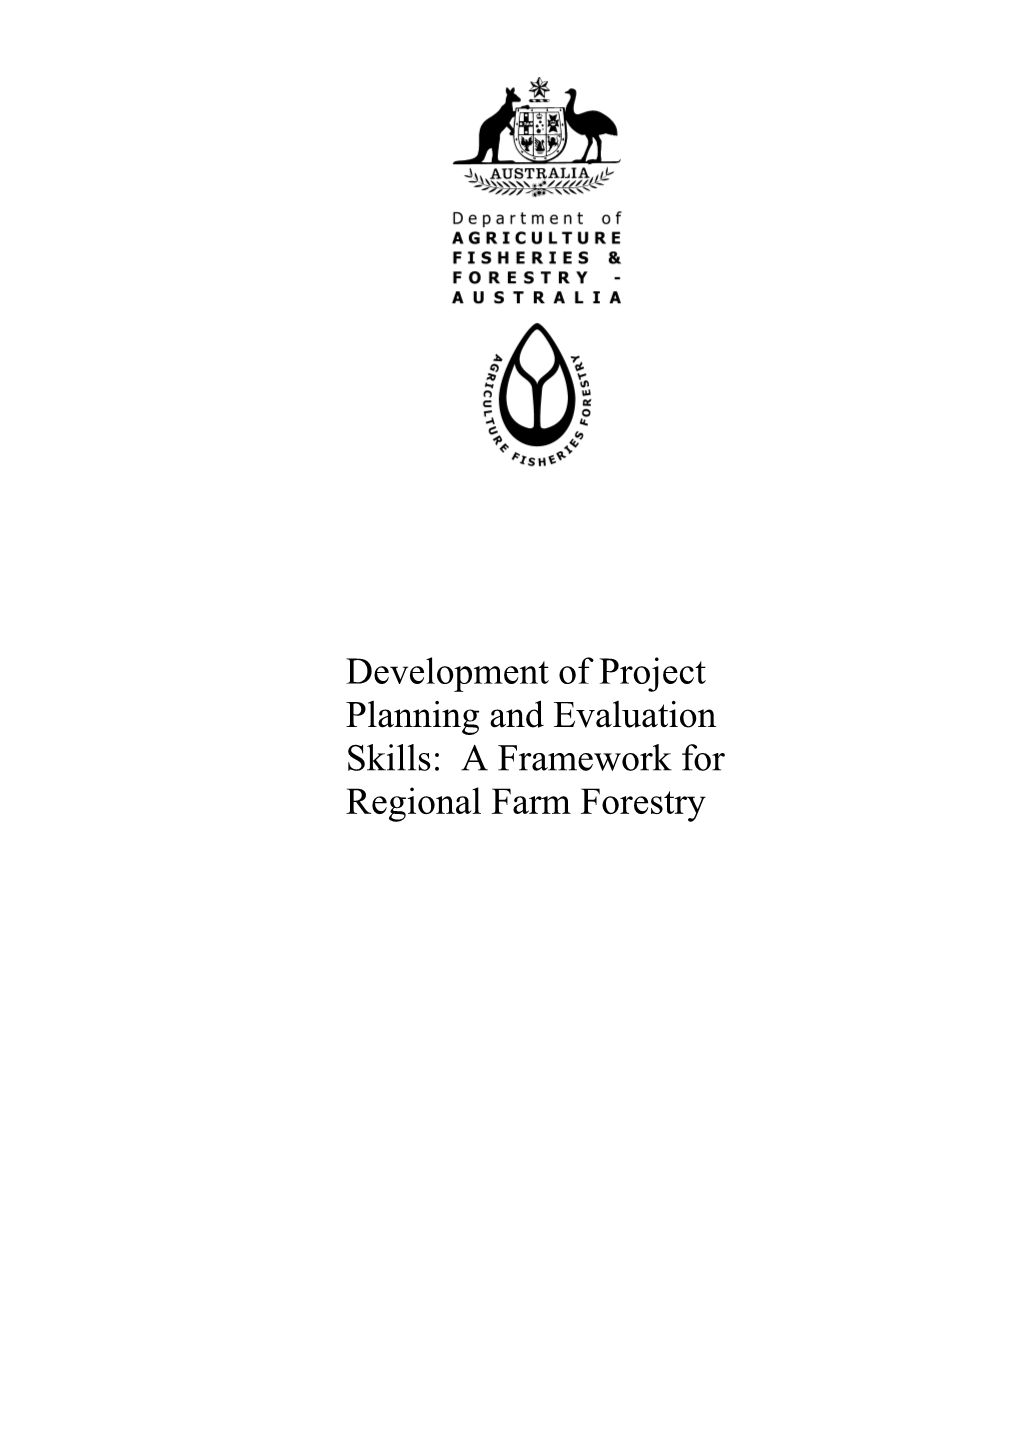 Development of Project Planning and Evaluation Skills: a Framework for Regional Farm Forestry